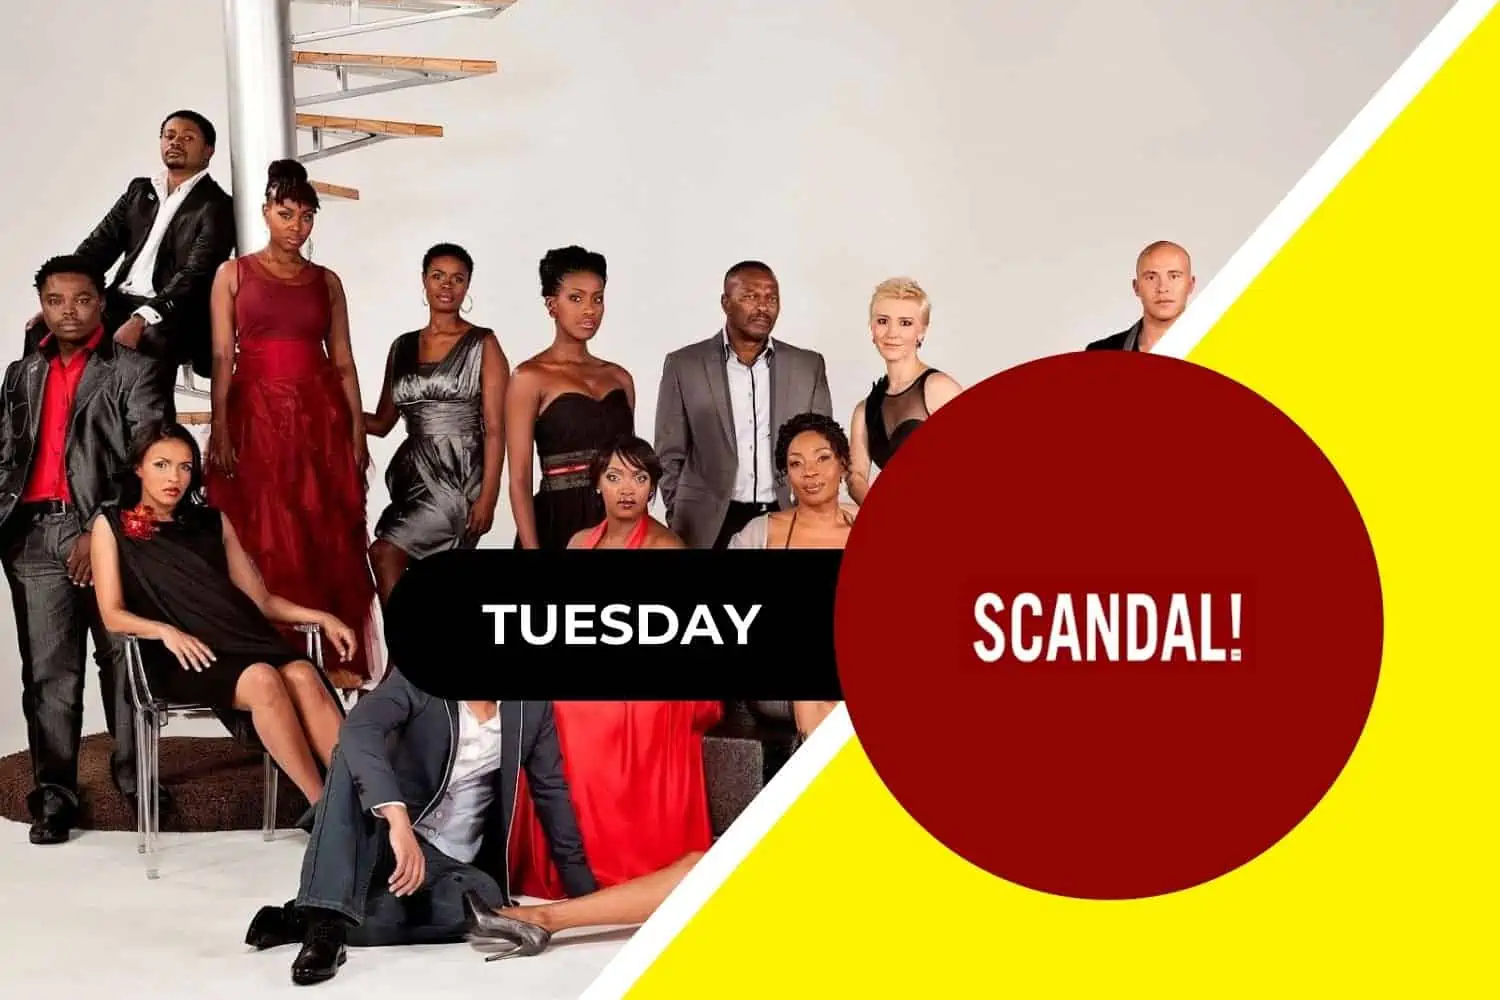 On today's episode of Scandal! Tuesday